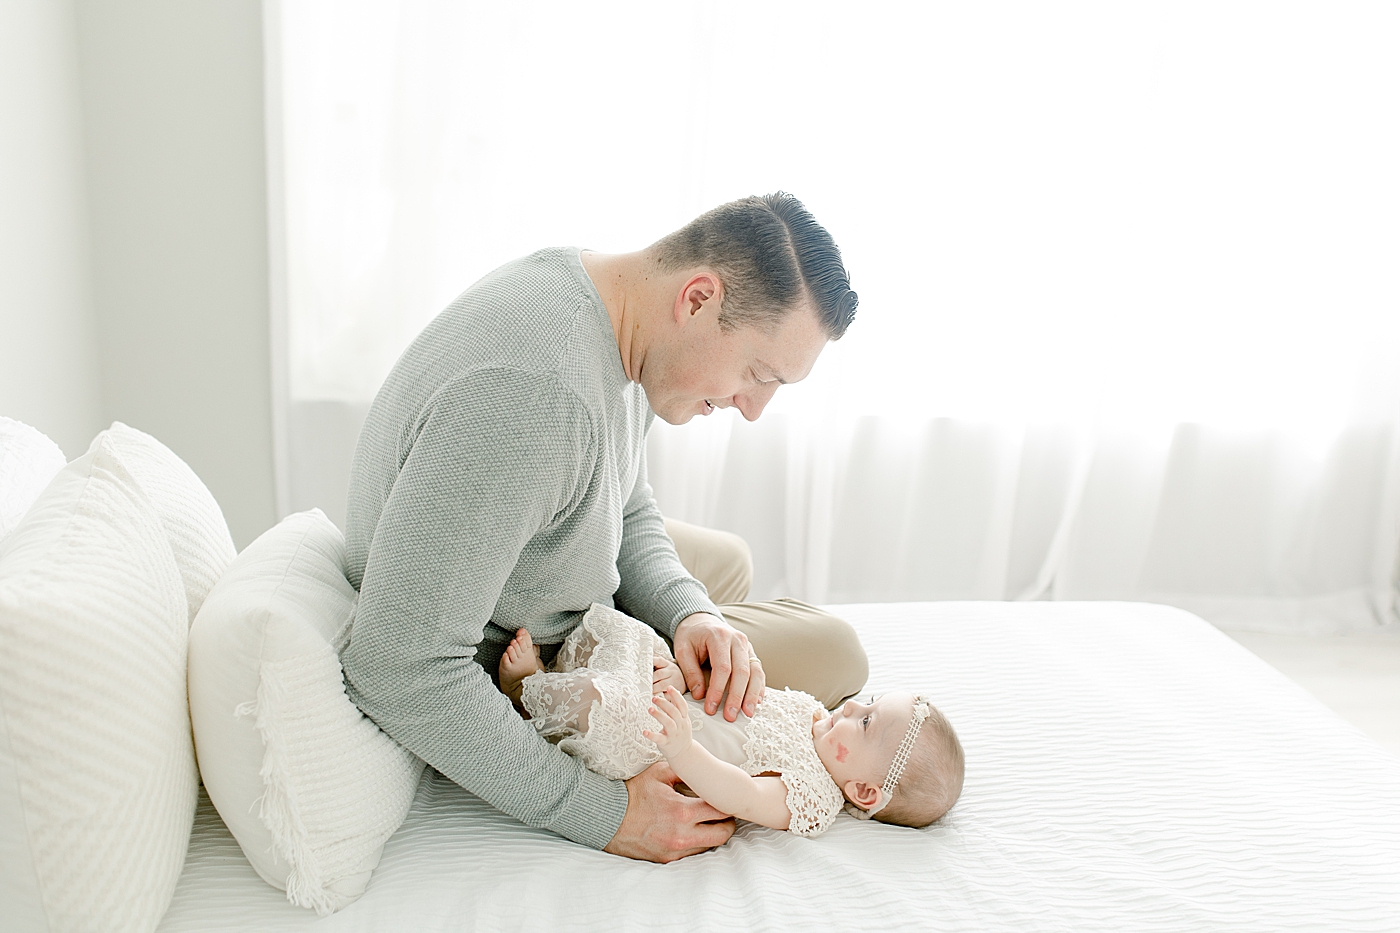 Dad sitting with his baby girl on a bed | Photo by Little Sunshine Photography